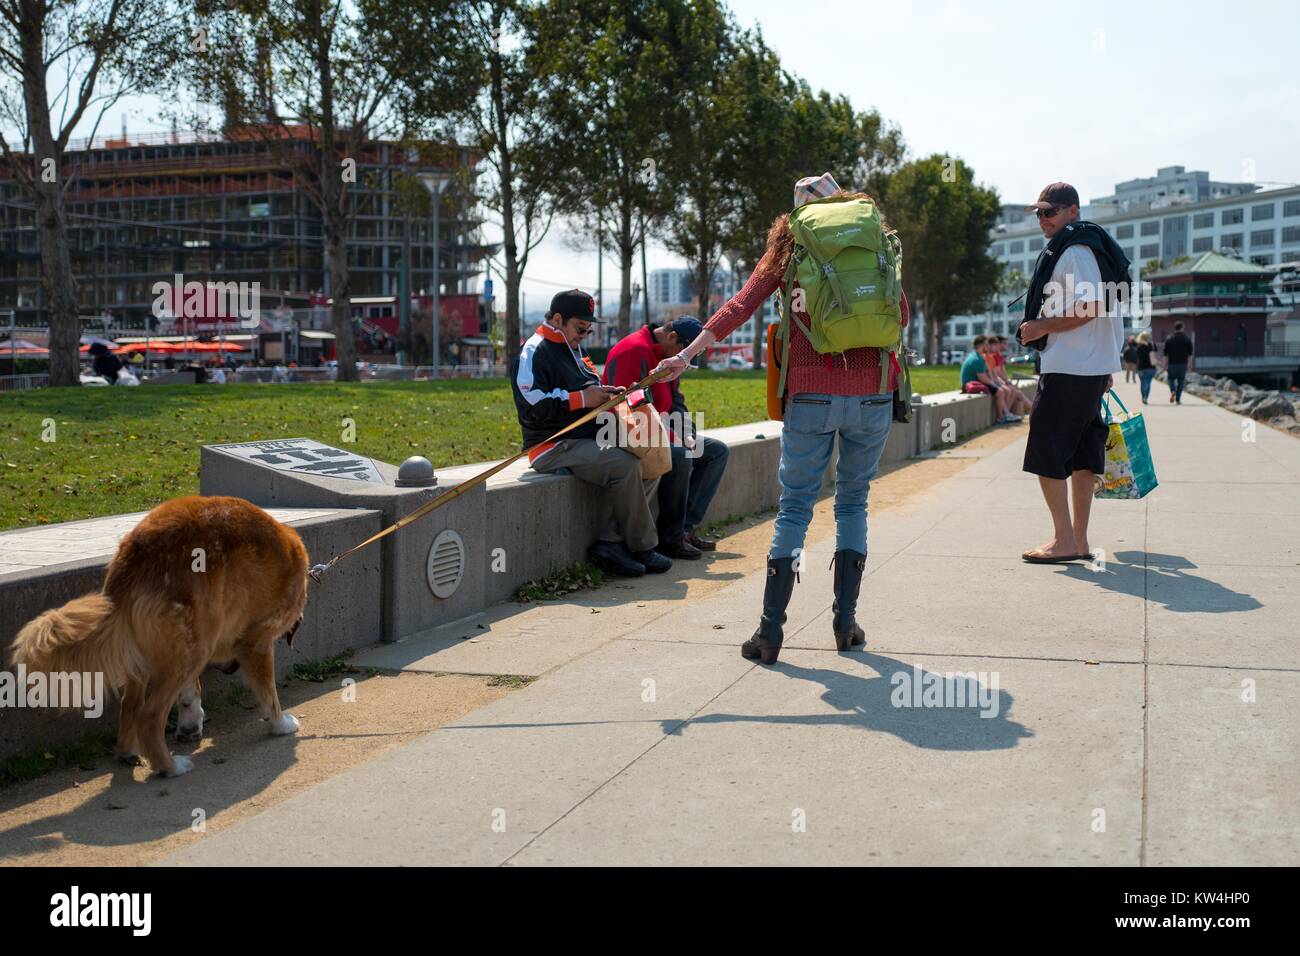 A couple walk their dog through China Basin Park before the Dog Days of Summer promotional baseball game, a yearly event in which the San Francisco Giants baseball team allows fans to bring their dogs to a regular season game, near ATT Park in the China Basin neighborhood of San Francisco, California, August 21, 2016. Stock Photo